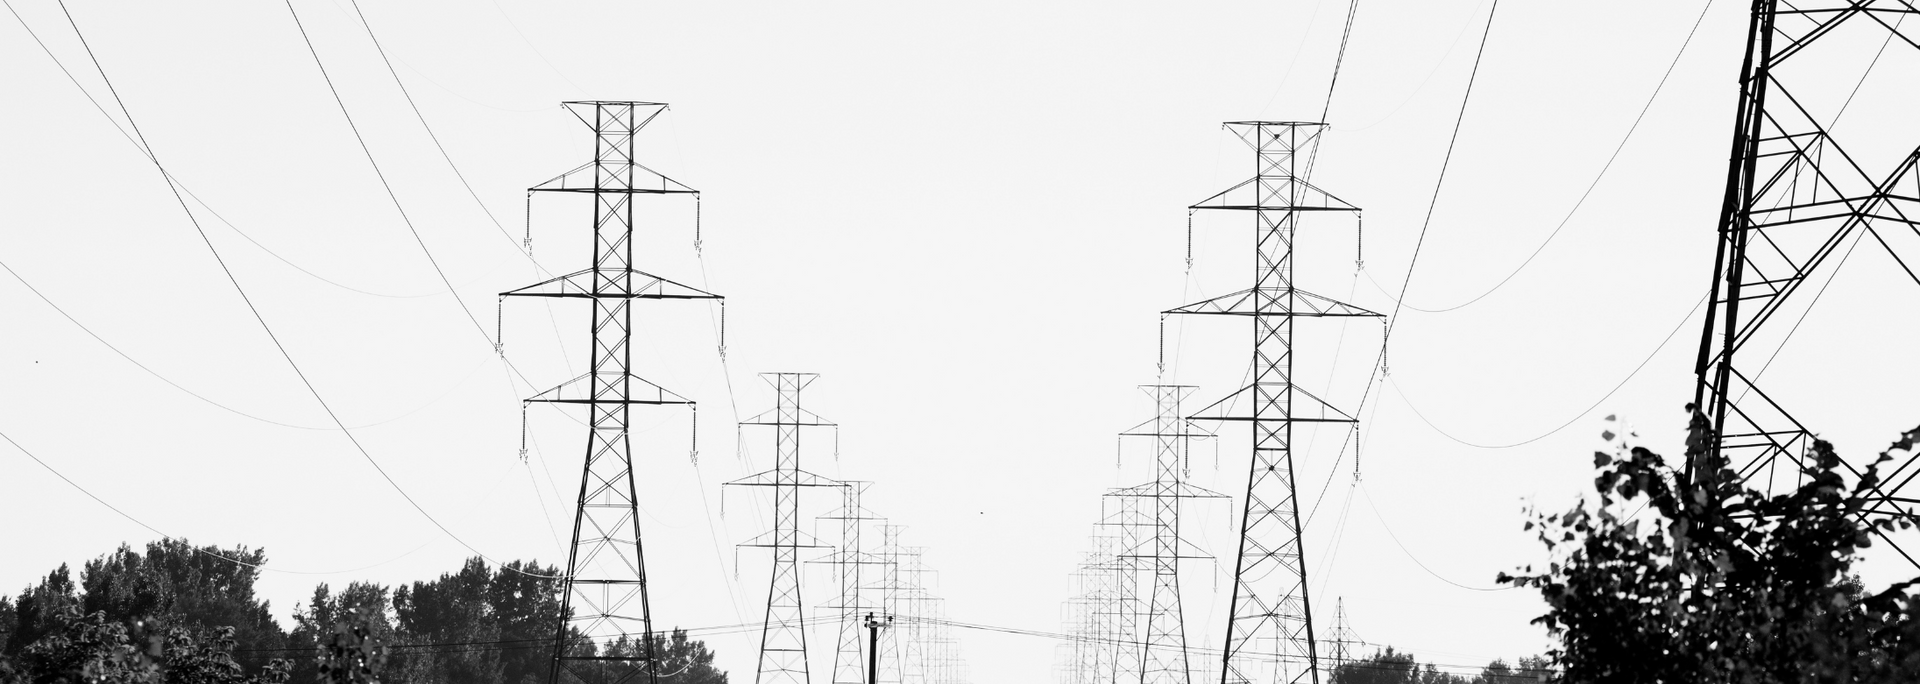 Picture of some electricity pylons